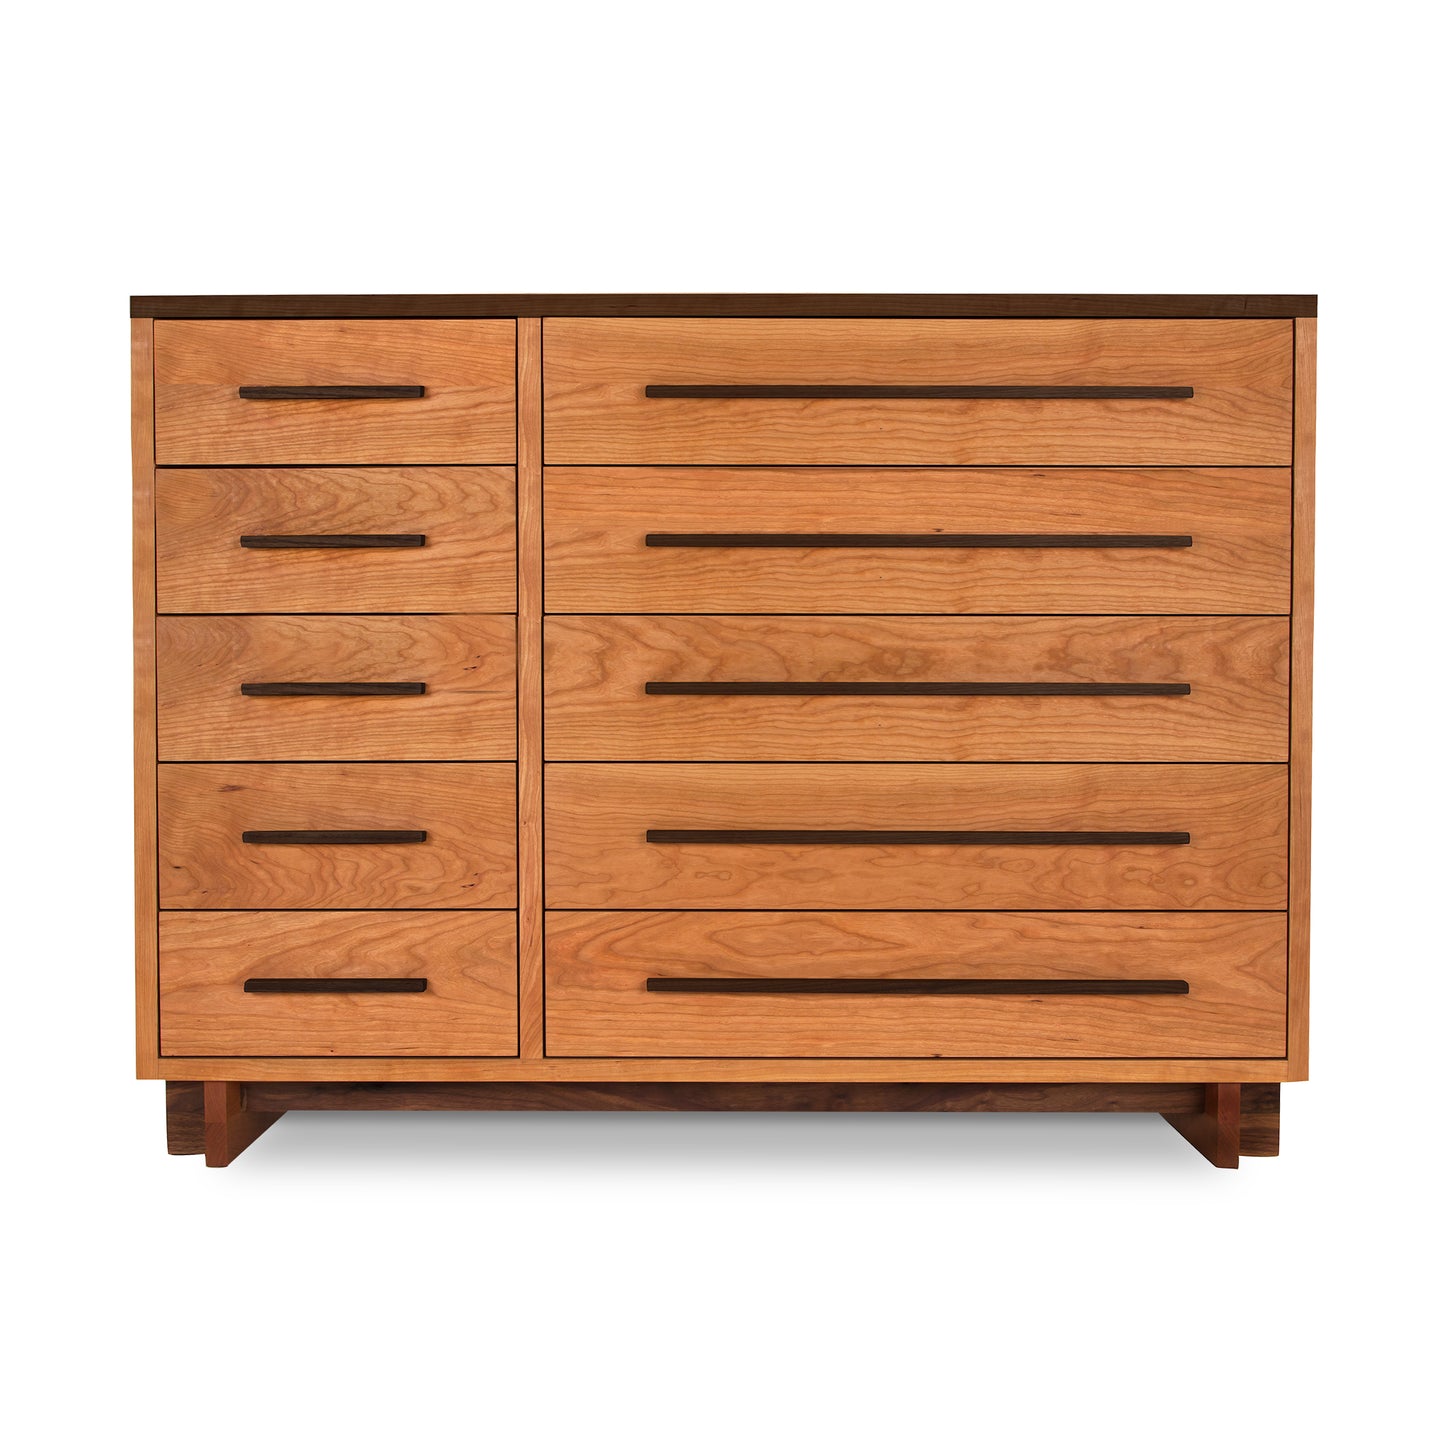 A Modern American 10-Drawer Dresser #2 made by Vermont Furniture Designs, with ten horizontal drawers, featuring recessed handles, set against a plain white background.